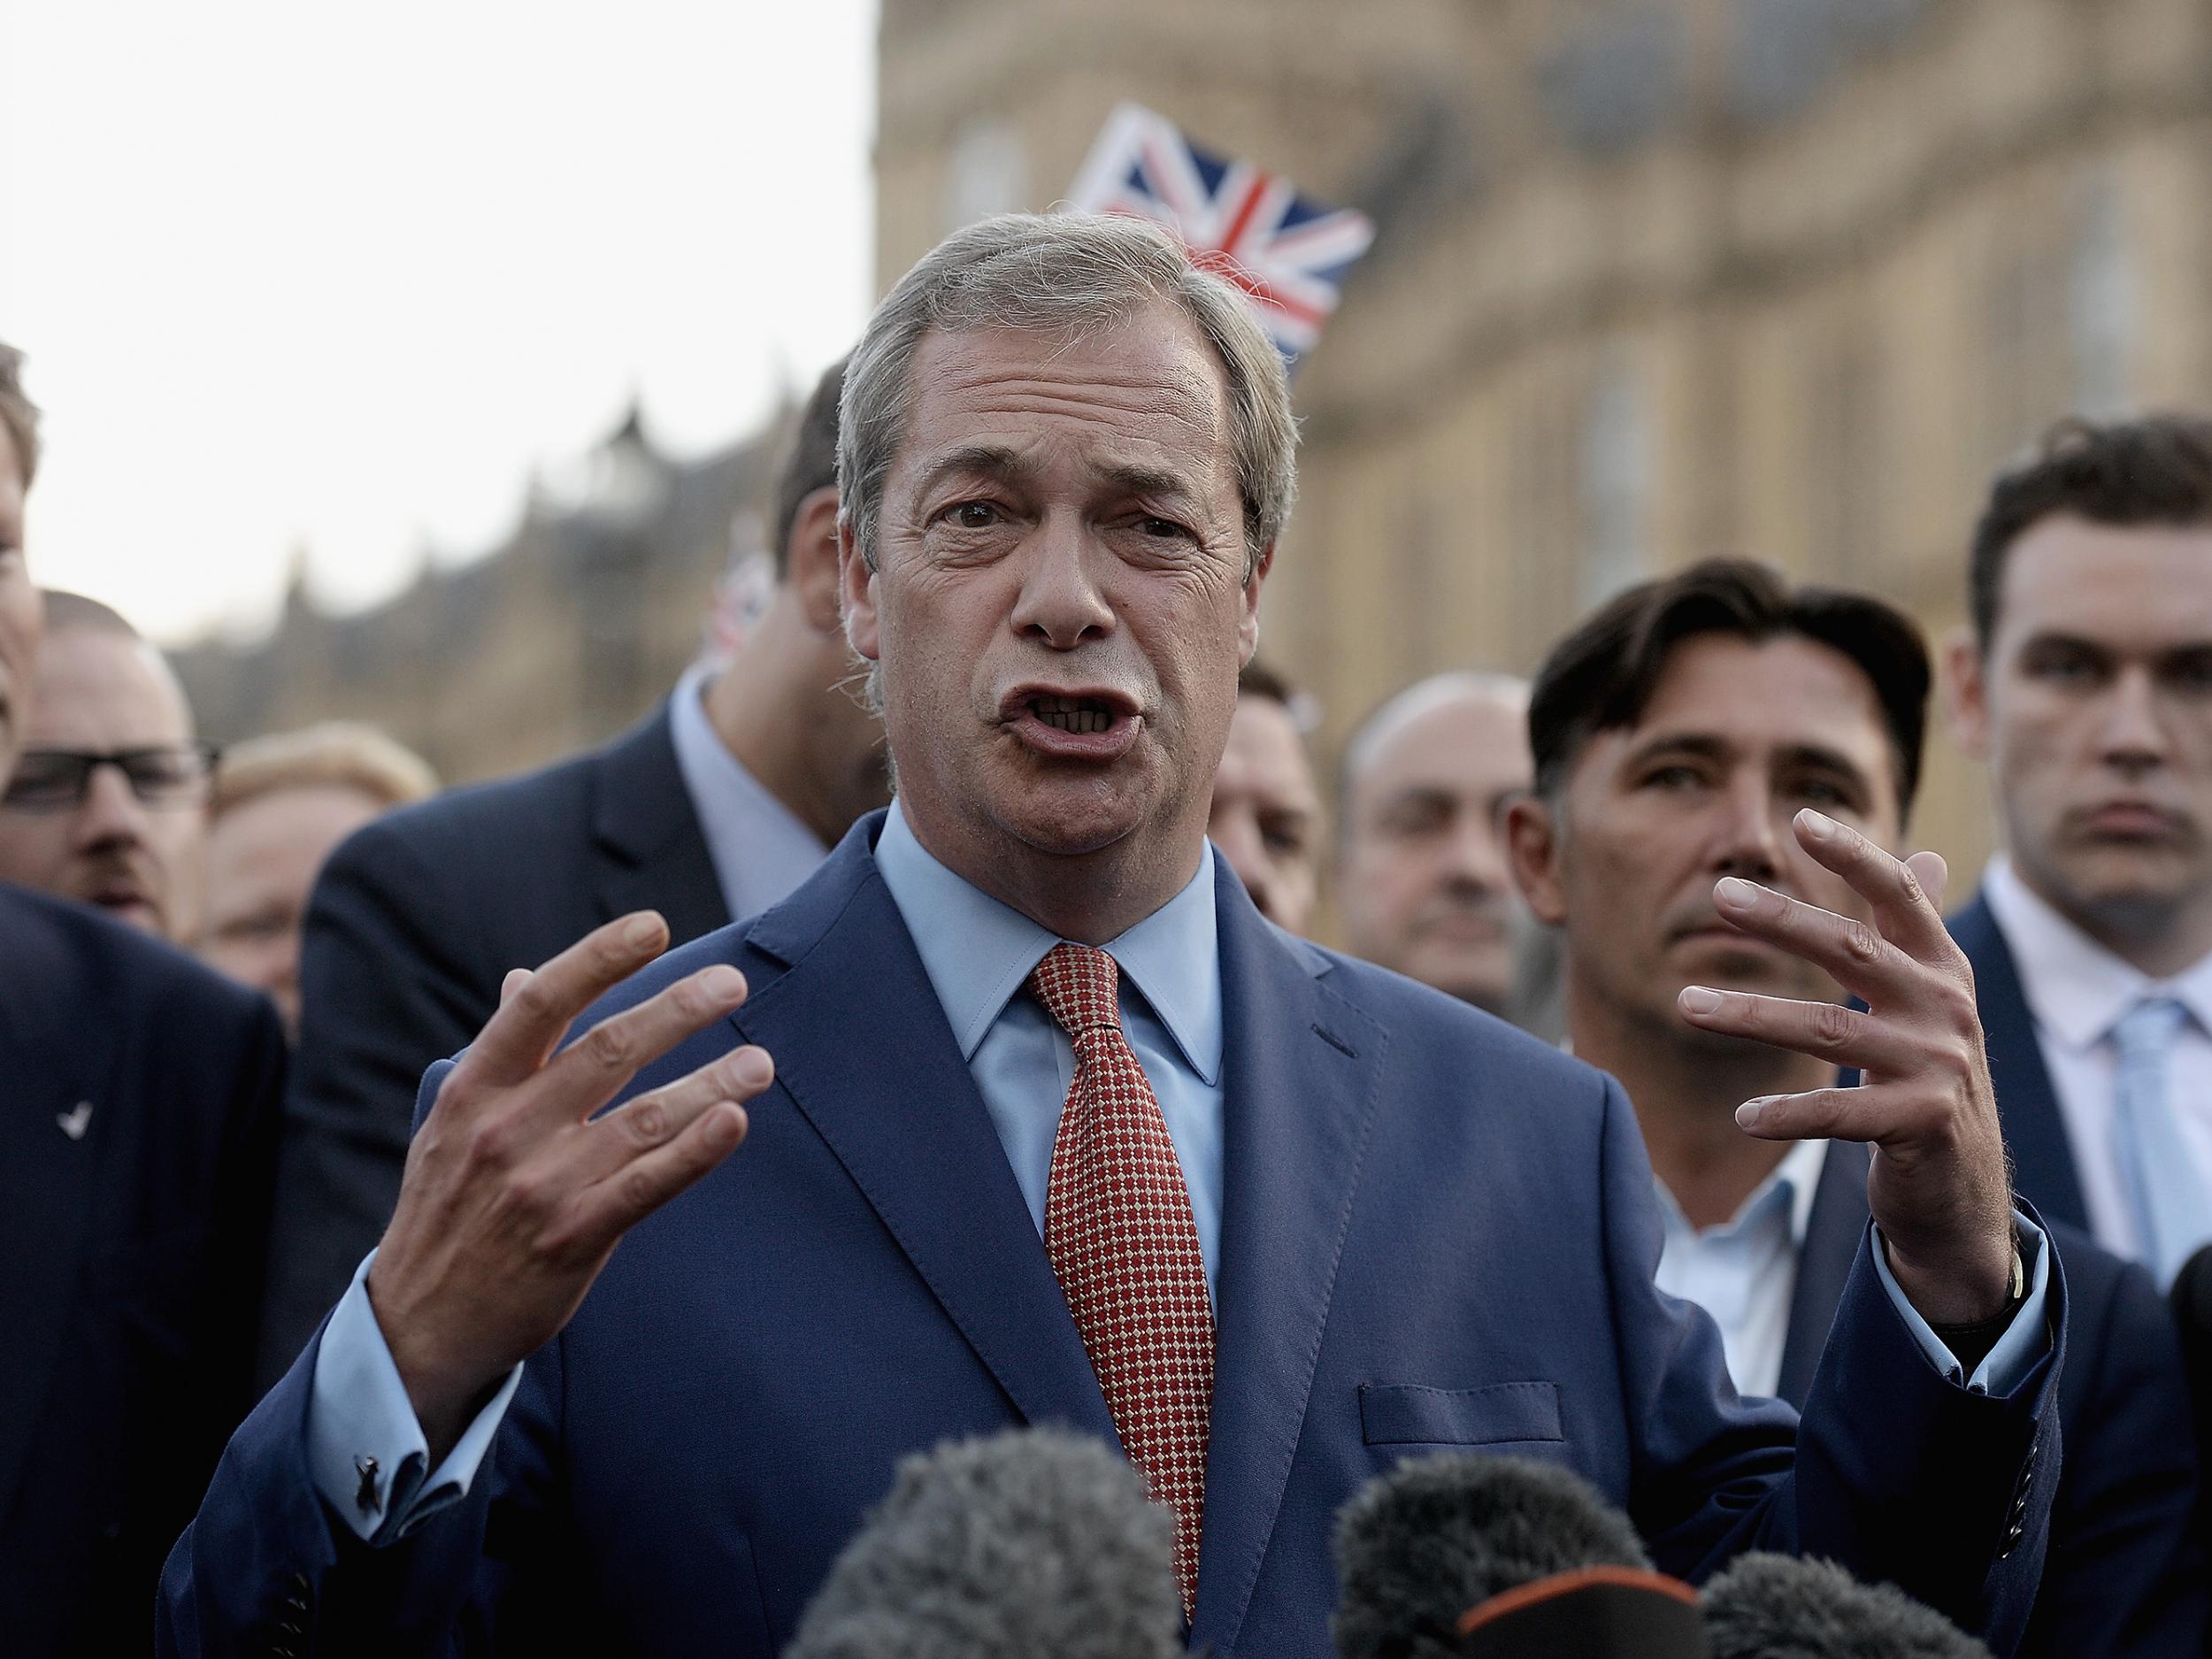 The UKIP leader has said that it will take two years for the economy to benefit from "global opportunities"